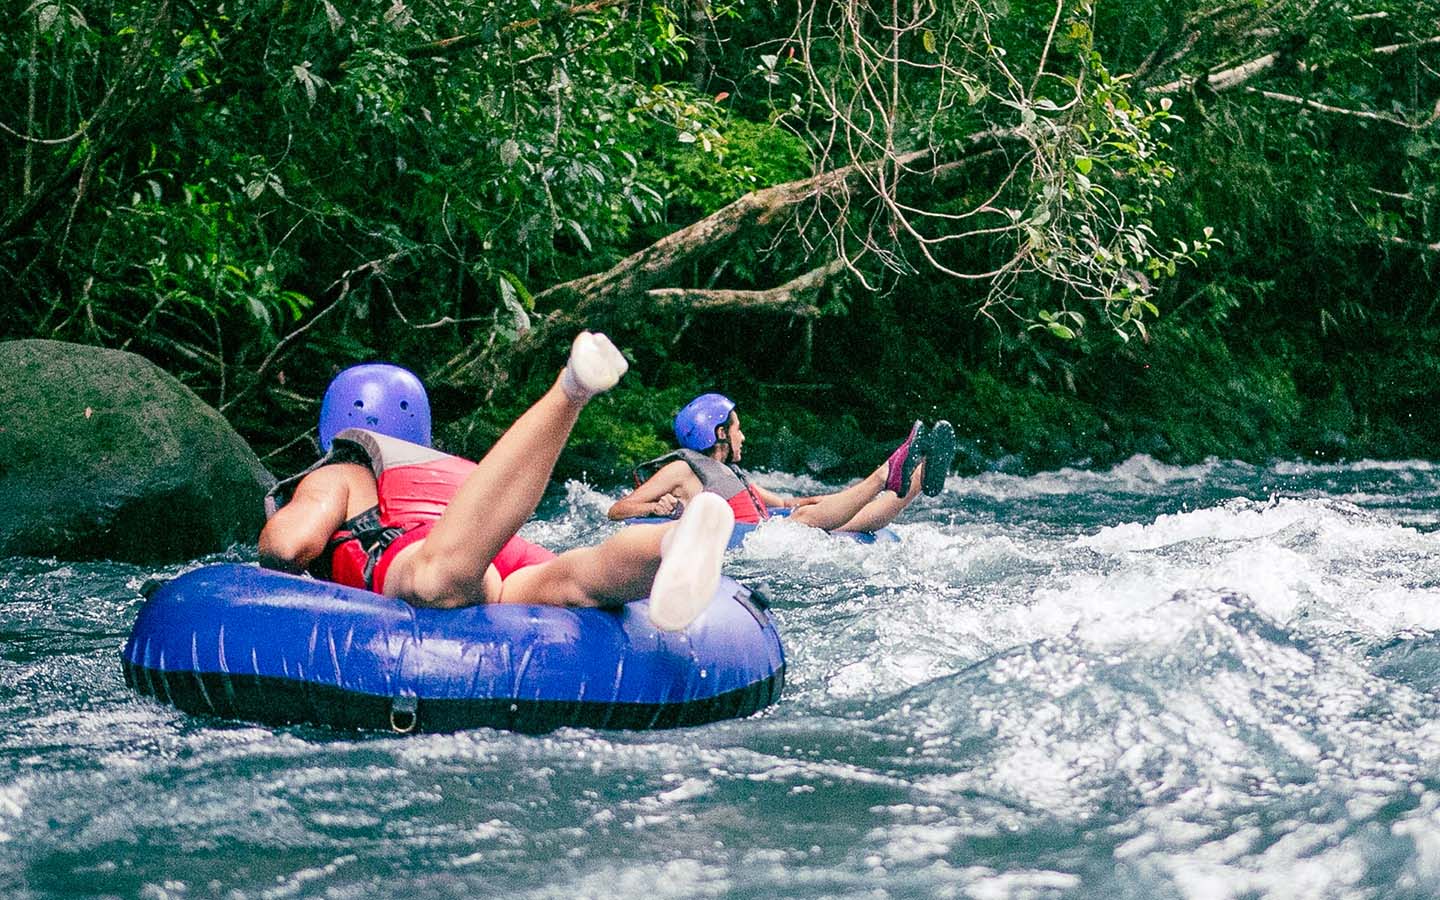 Two girls on a tube in Rio Celeste Rapids